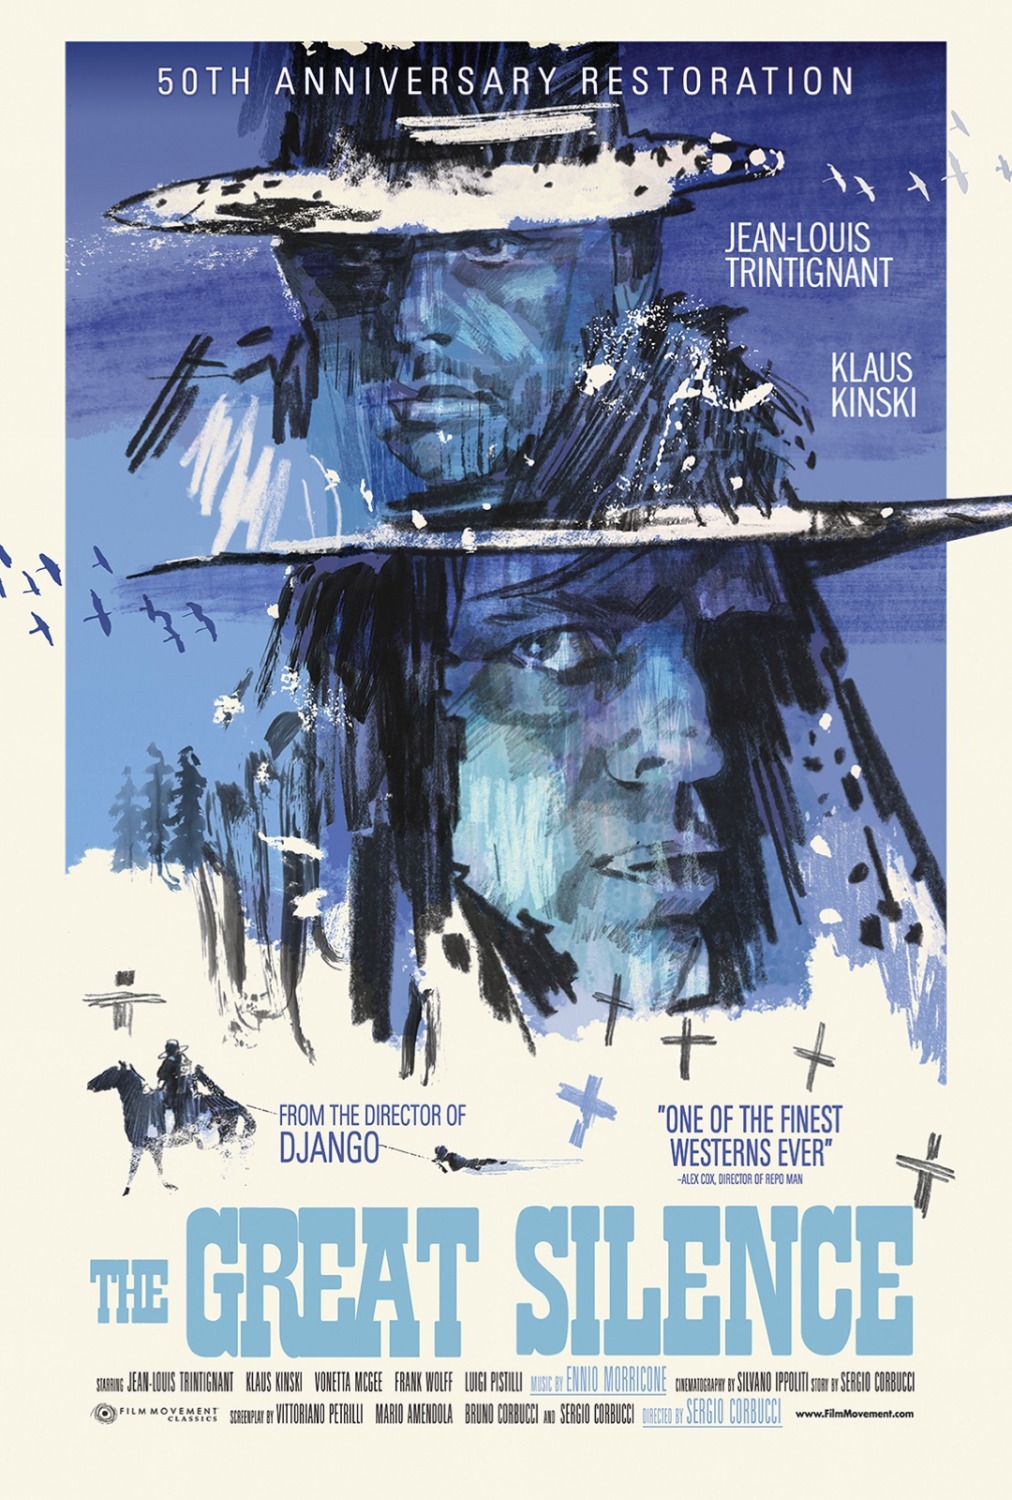 This month: The Great Silence (1968)  As a group of local bounty hunters bear down on a gang of outlaws, an interloping gunslinger intervenes. The name of this man: Silence, otherwise known as the outlaws' best chance at liberation.  Please join this Saturday for this snowy western landmark, from the second greatest director of Spaghetti-westerns.